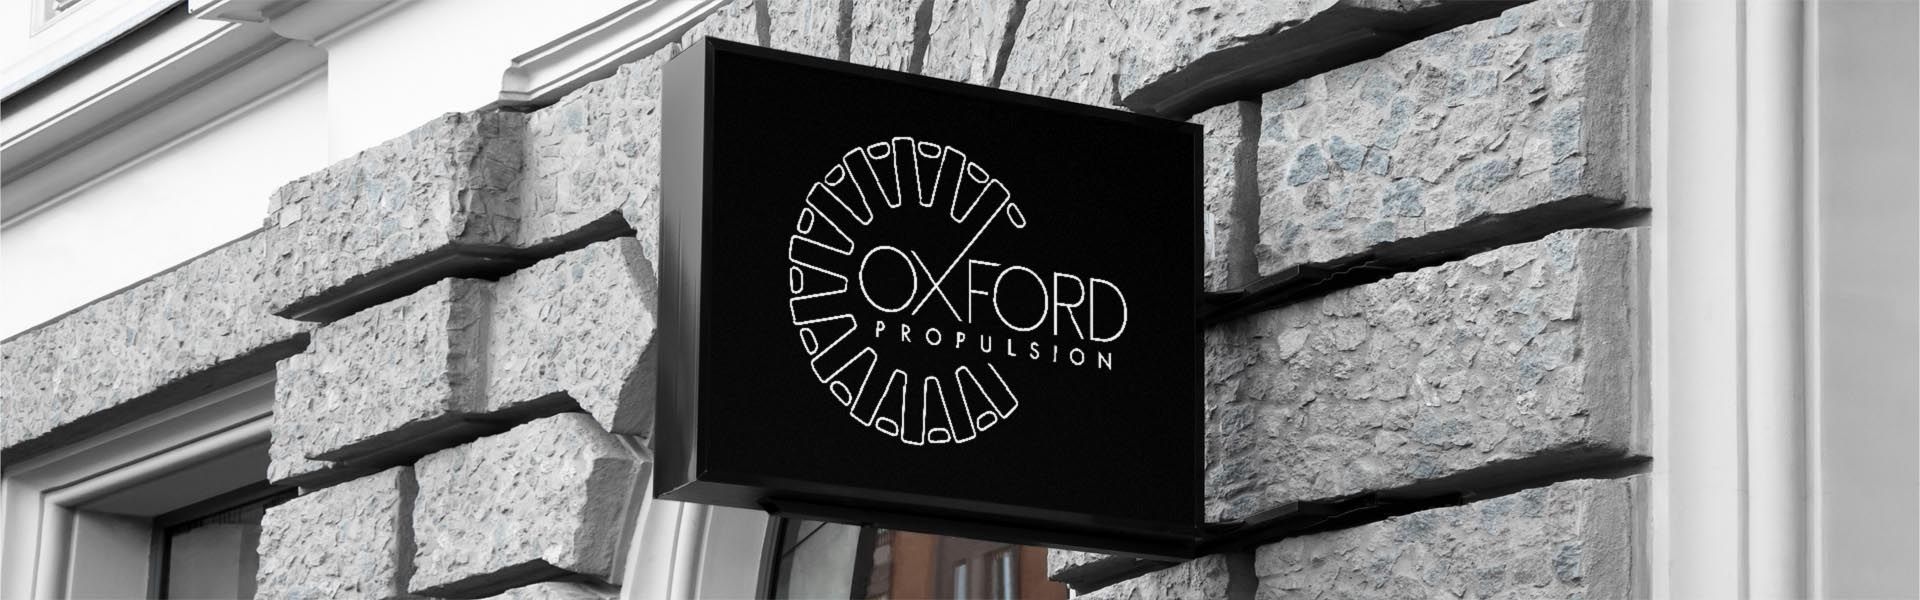 a sign for oxford propulsion hangs on a stone wall